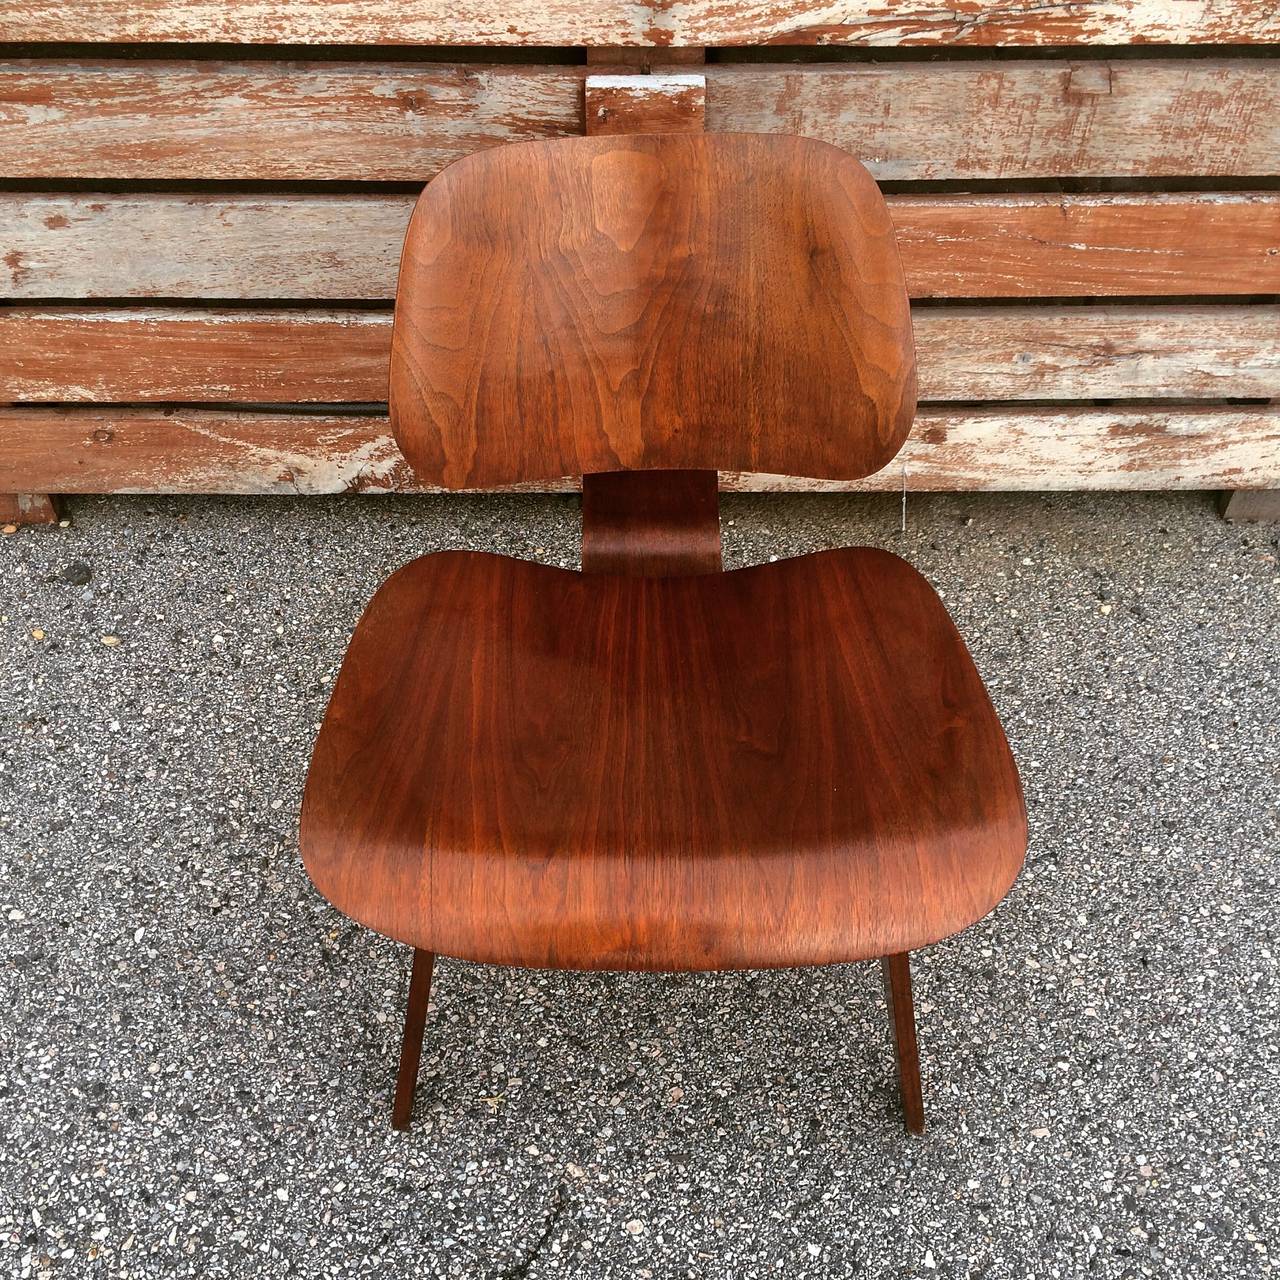 Early Eames walnut LCW by Evans Products. Dates to approximately 1947 based on label. Original shock mounts. In original condition with exceptional patina. No damage to the wood veneers. Highly figured grains and warm rich tones.